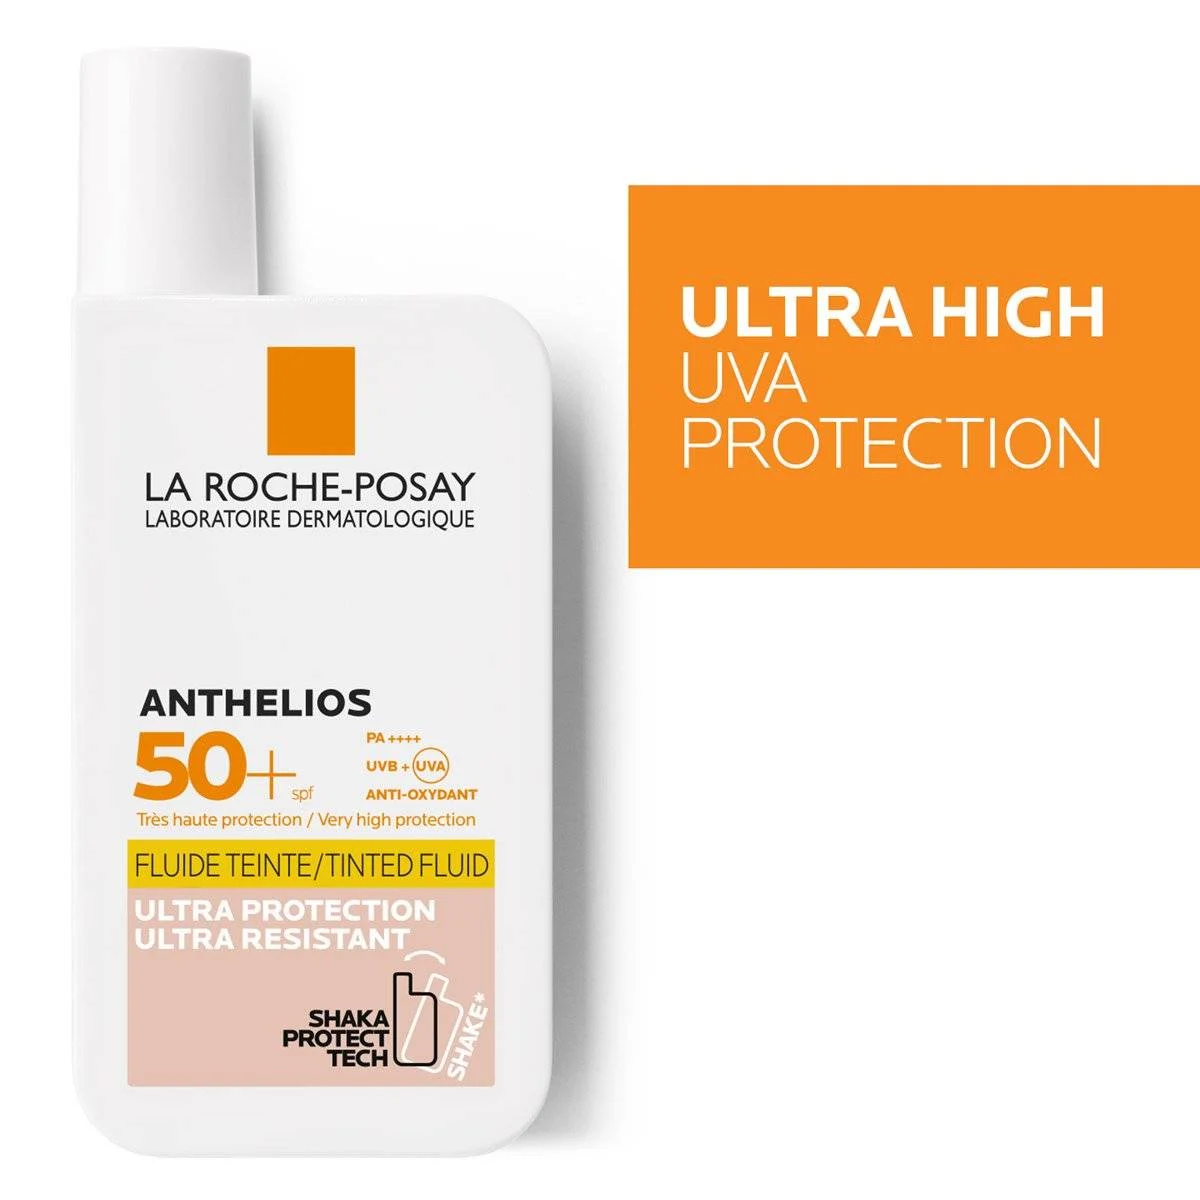 Which La Roche-Posay Anthelios SPF Should I Be Using? - Escentual's Blog